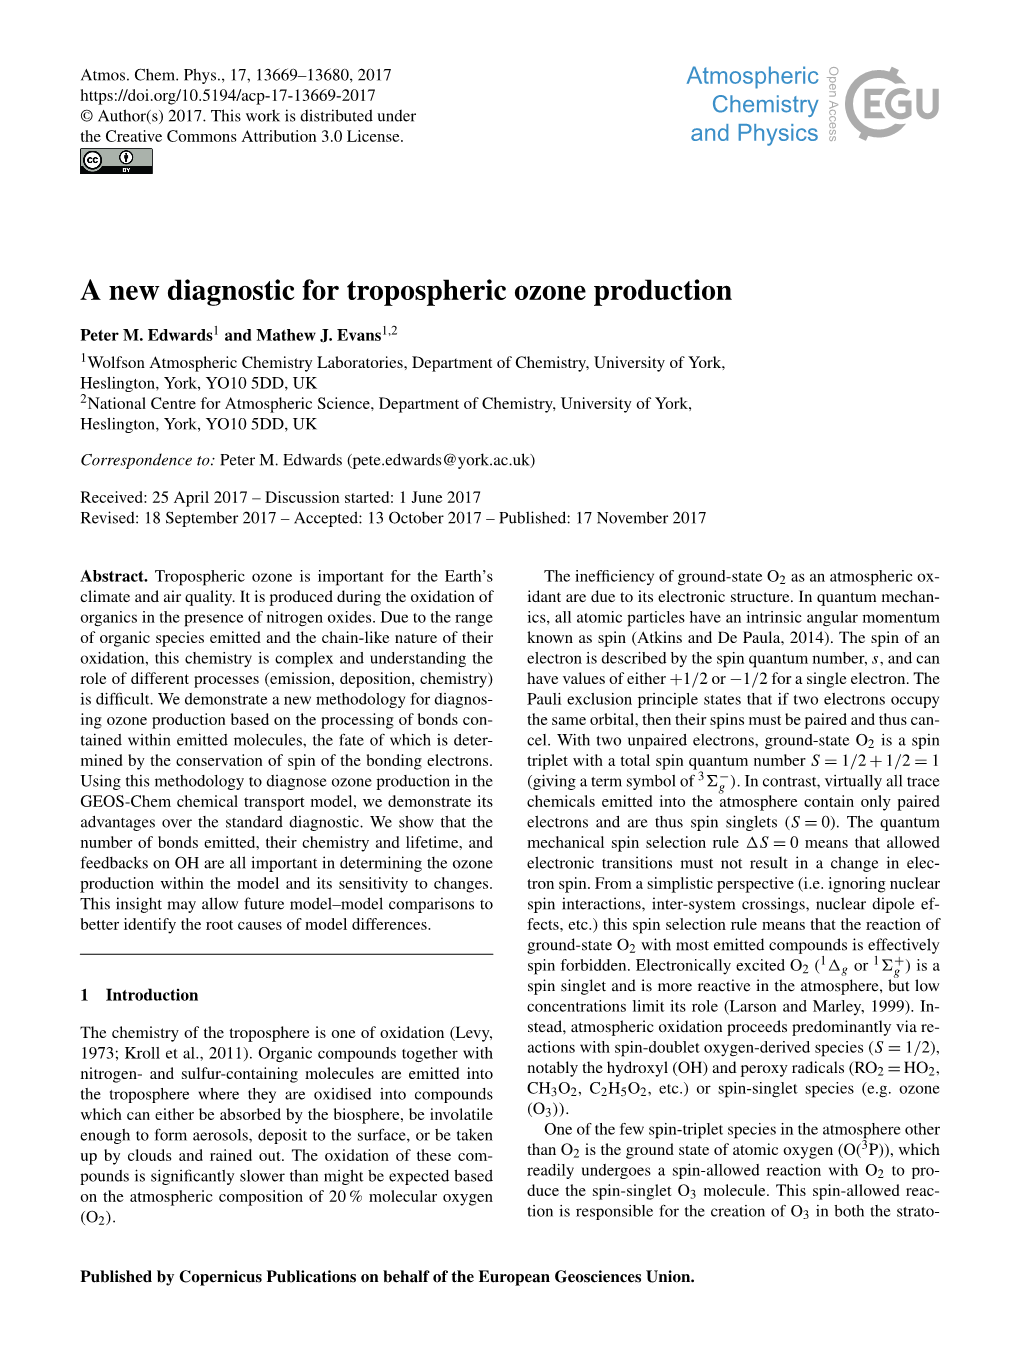 A New Diagnostic for Tropospheric Ozone Production